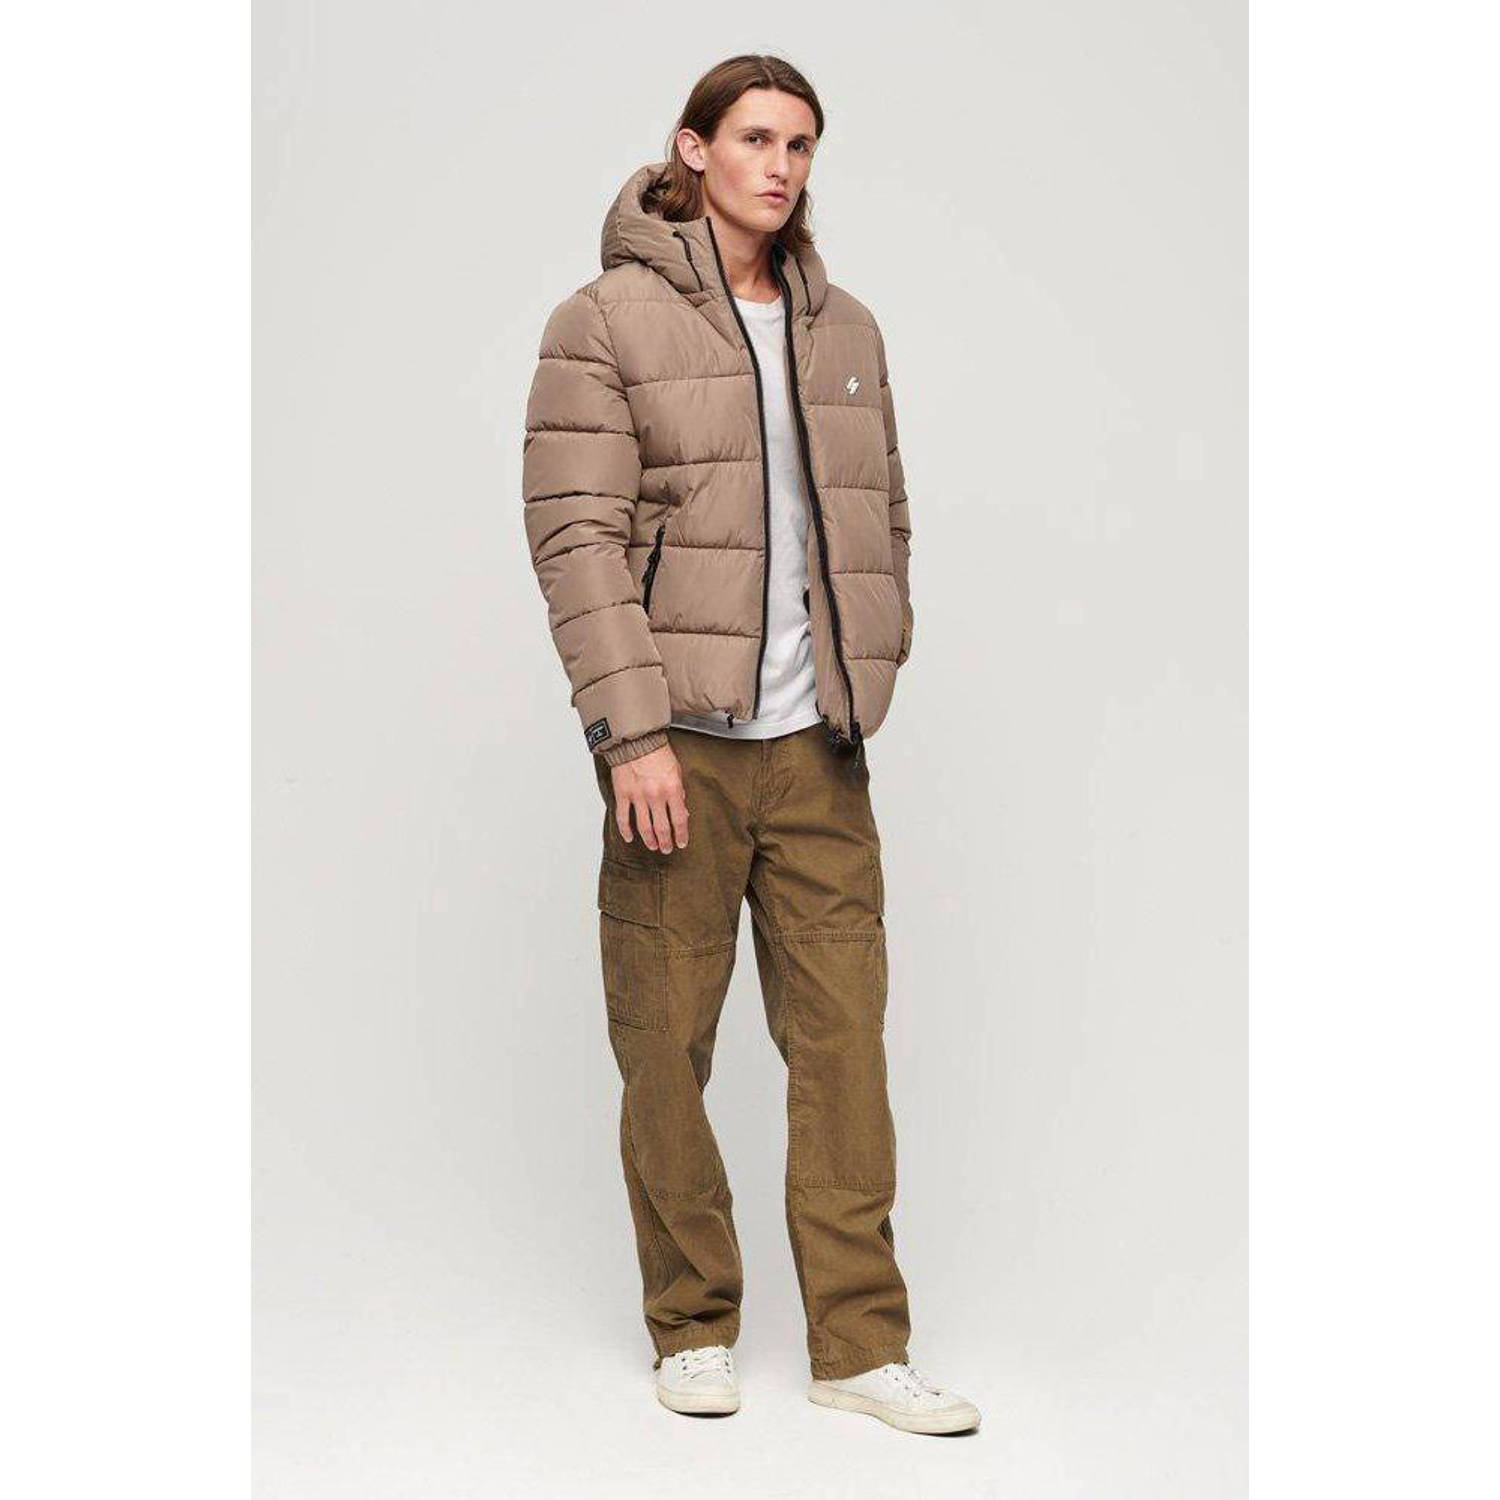 Superdry sports puffer jas fossil brown